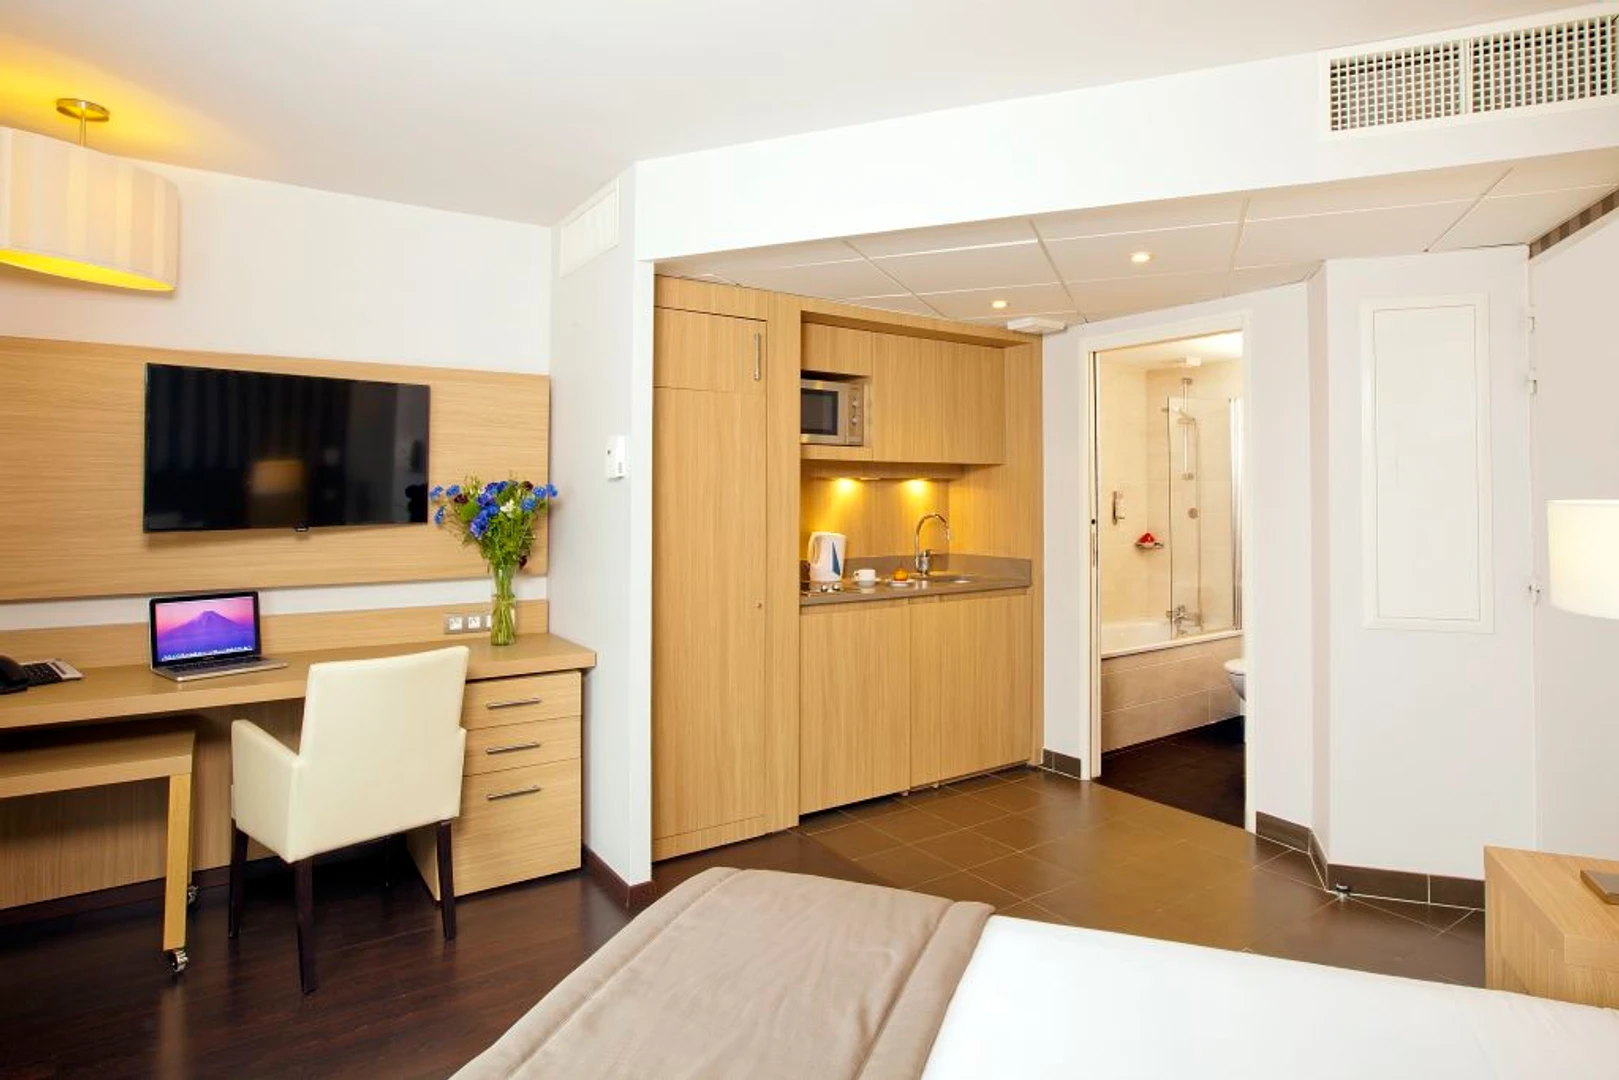 Accommodation in the centre of Nantes